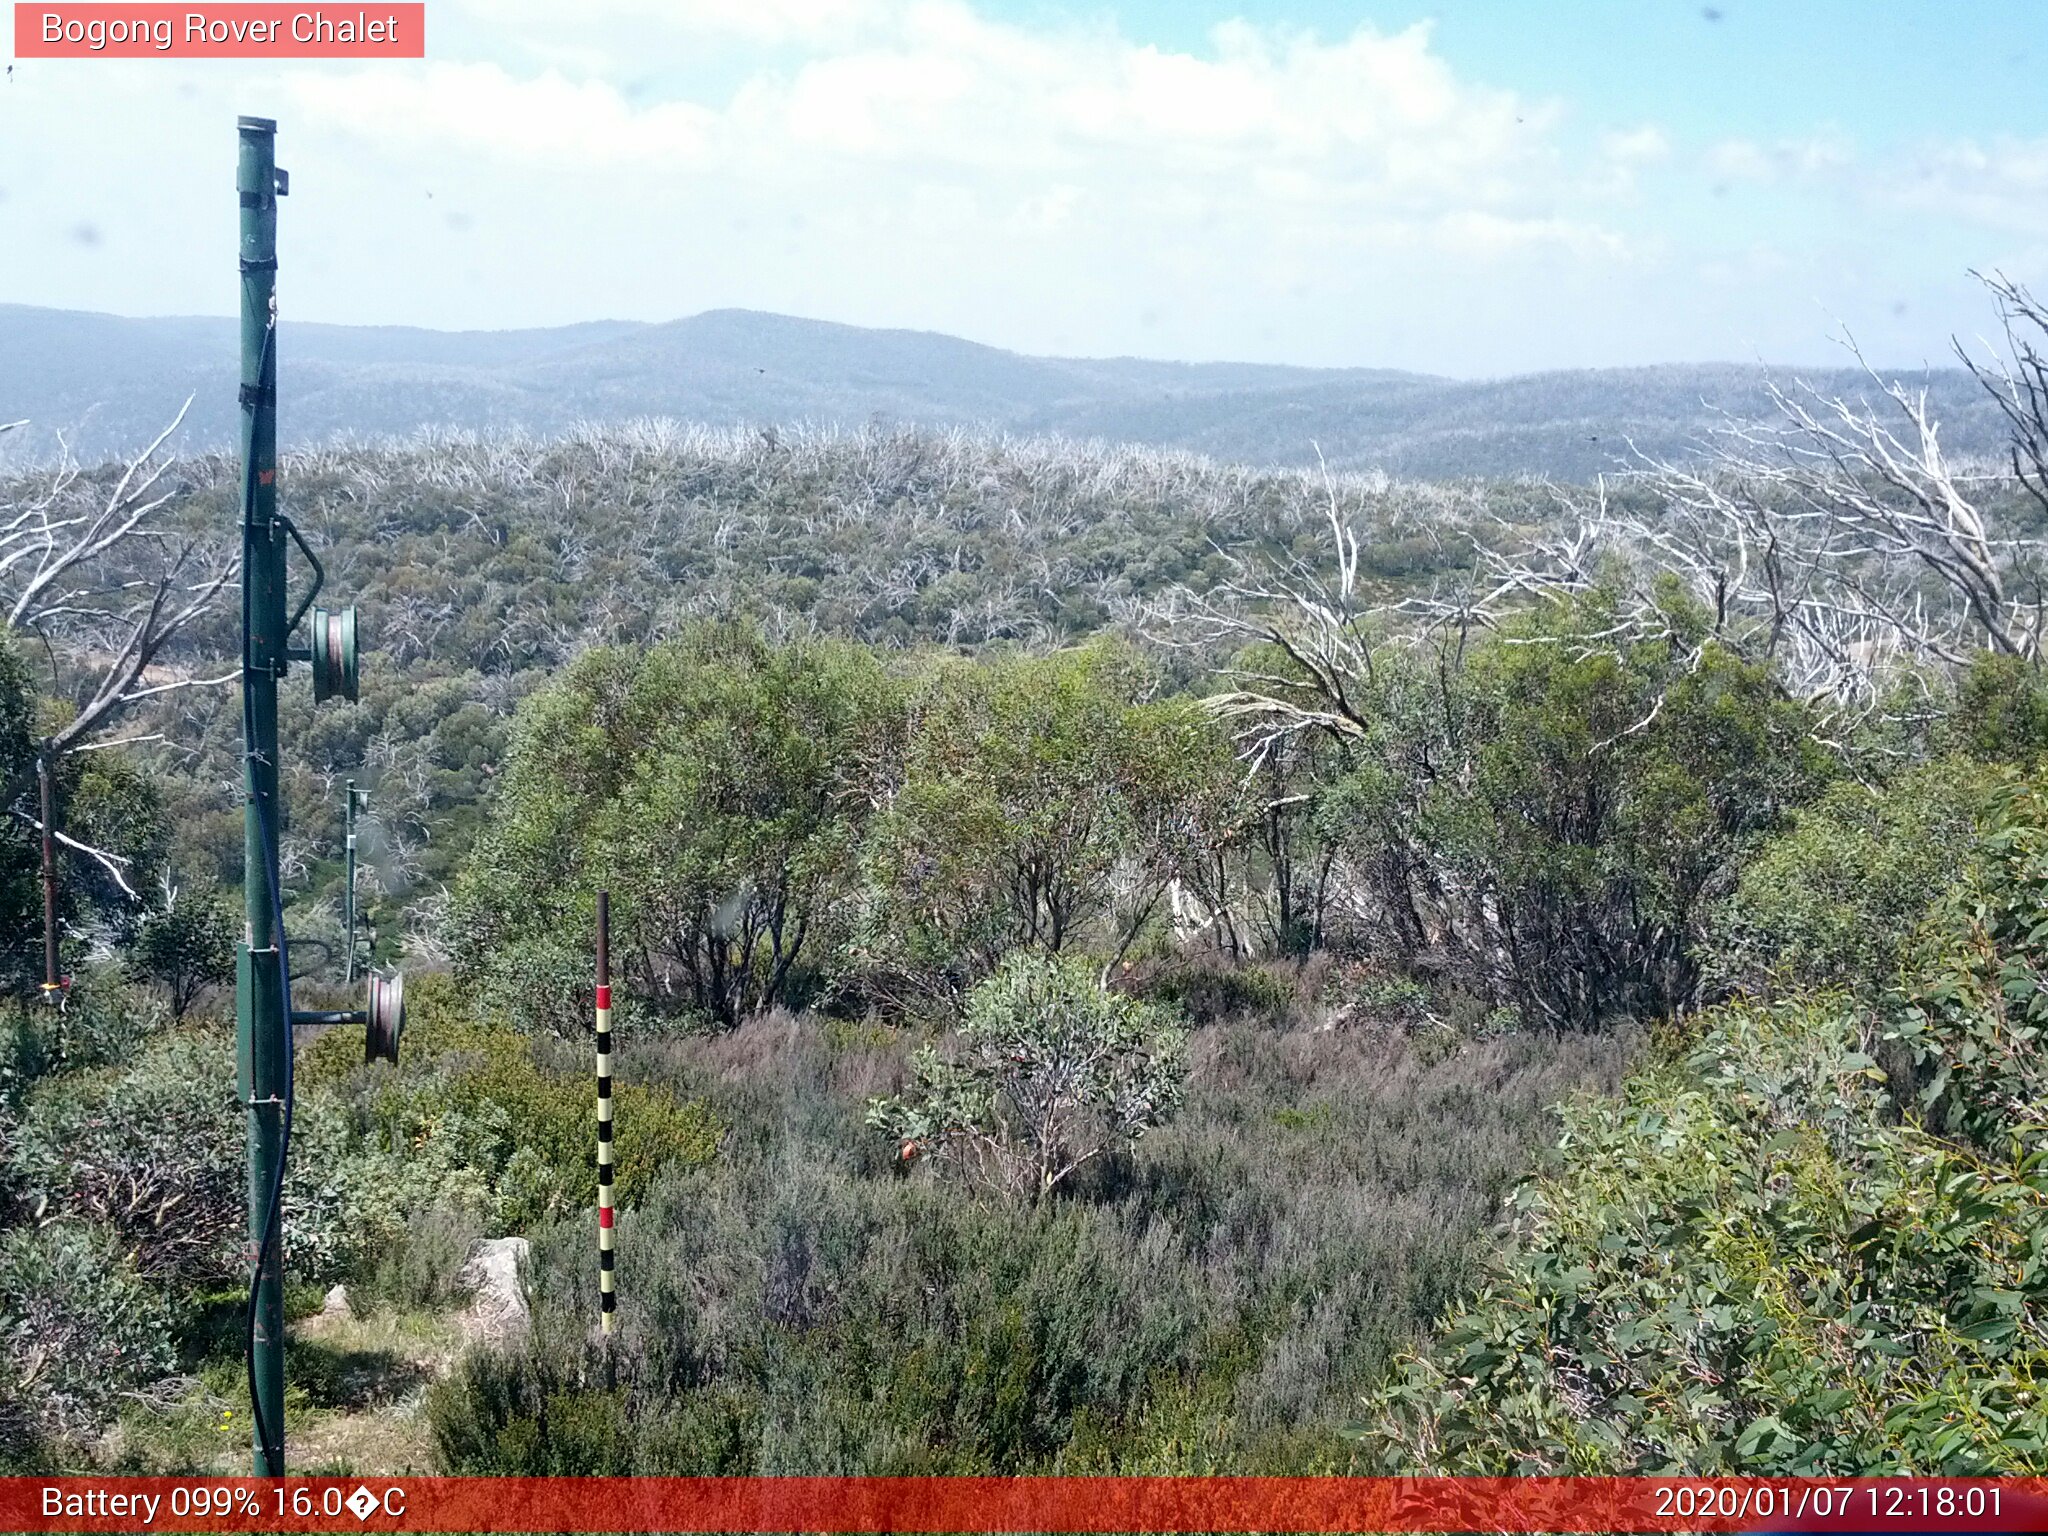 Bogong Web Cam 12:18pm Tuesday 7th of January 2020